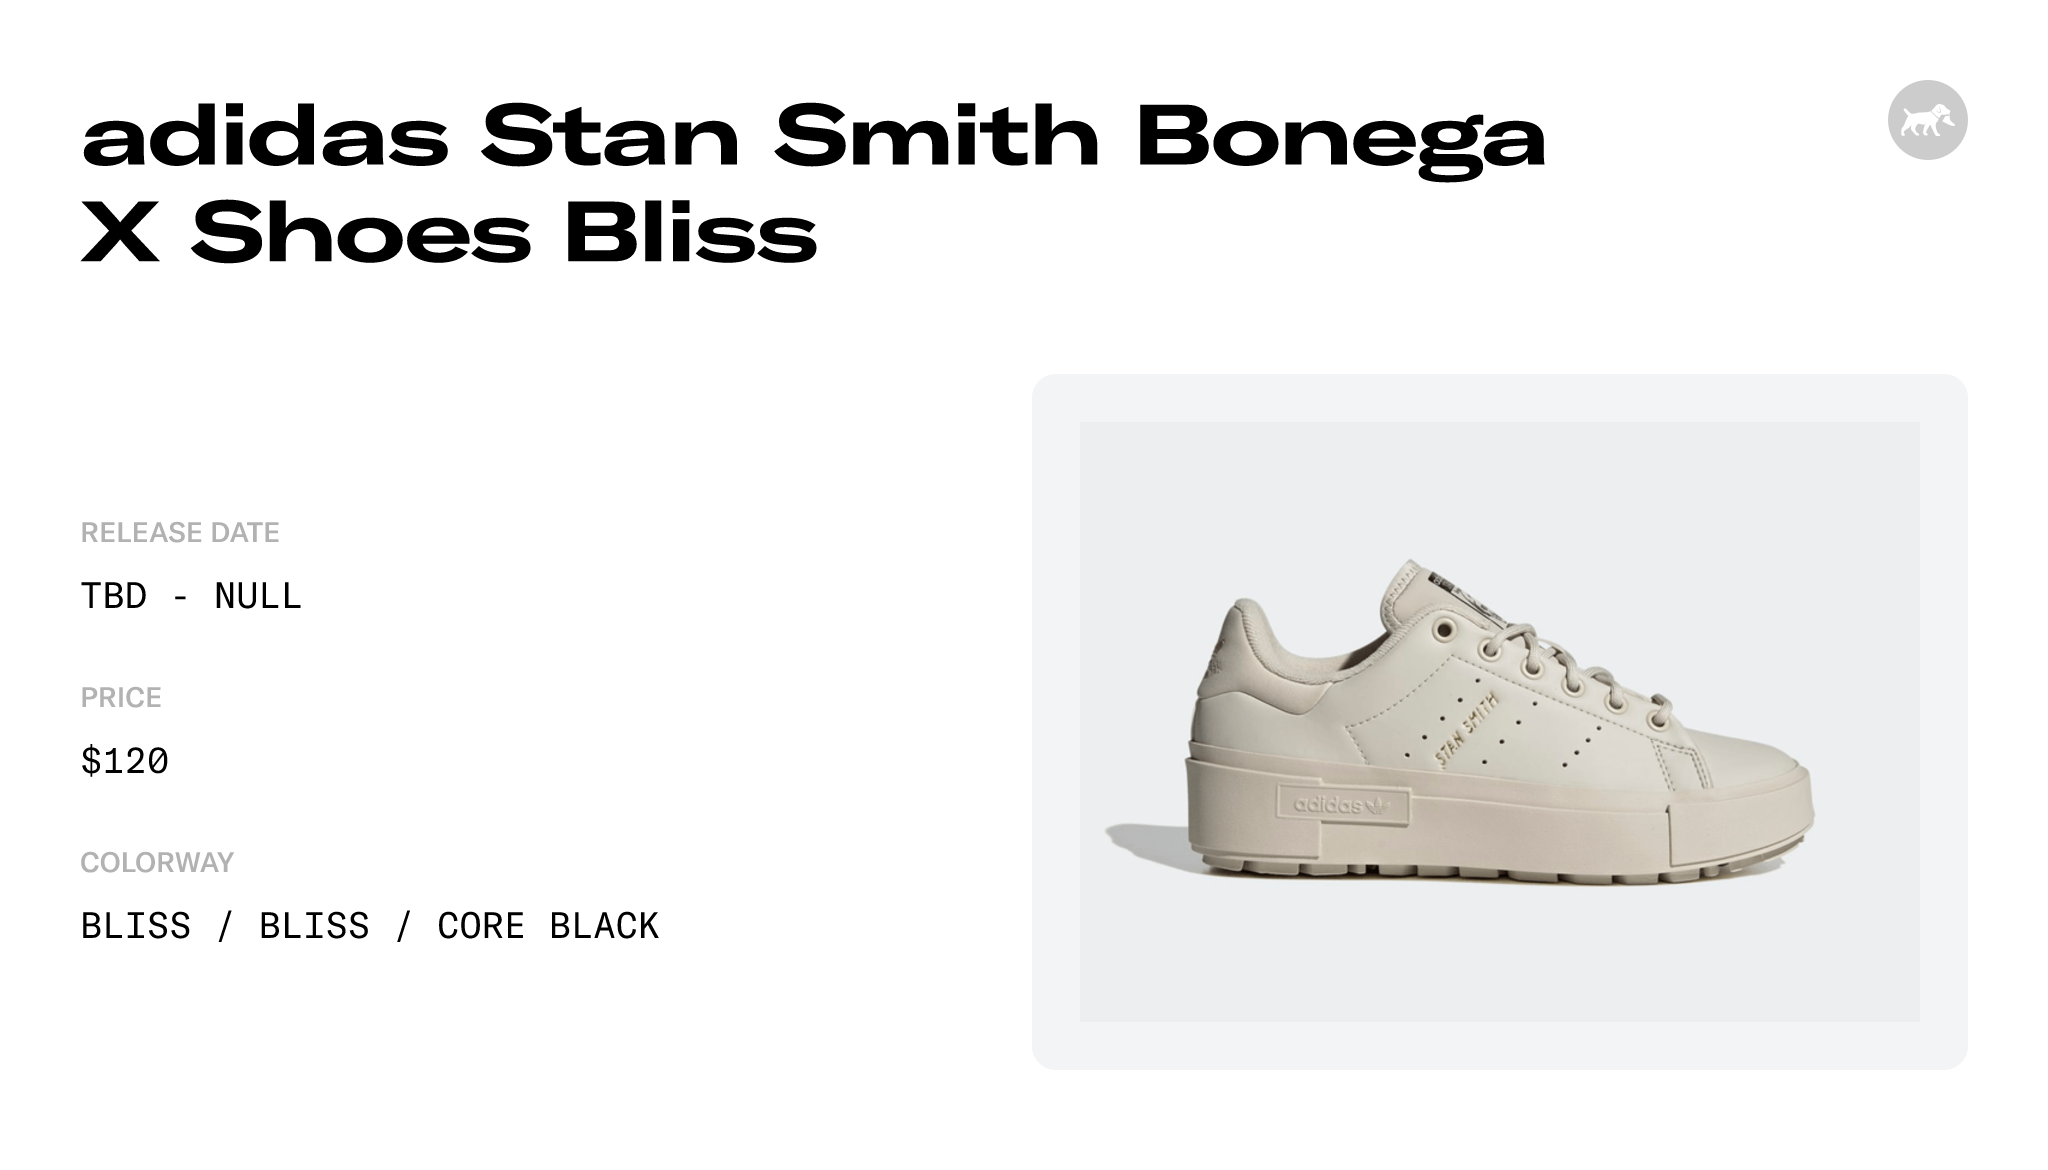 and X adidas GY1499 Release - Smith Date Bonega Bliss Raffles Shoes Stan